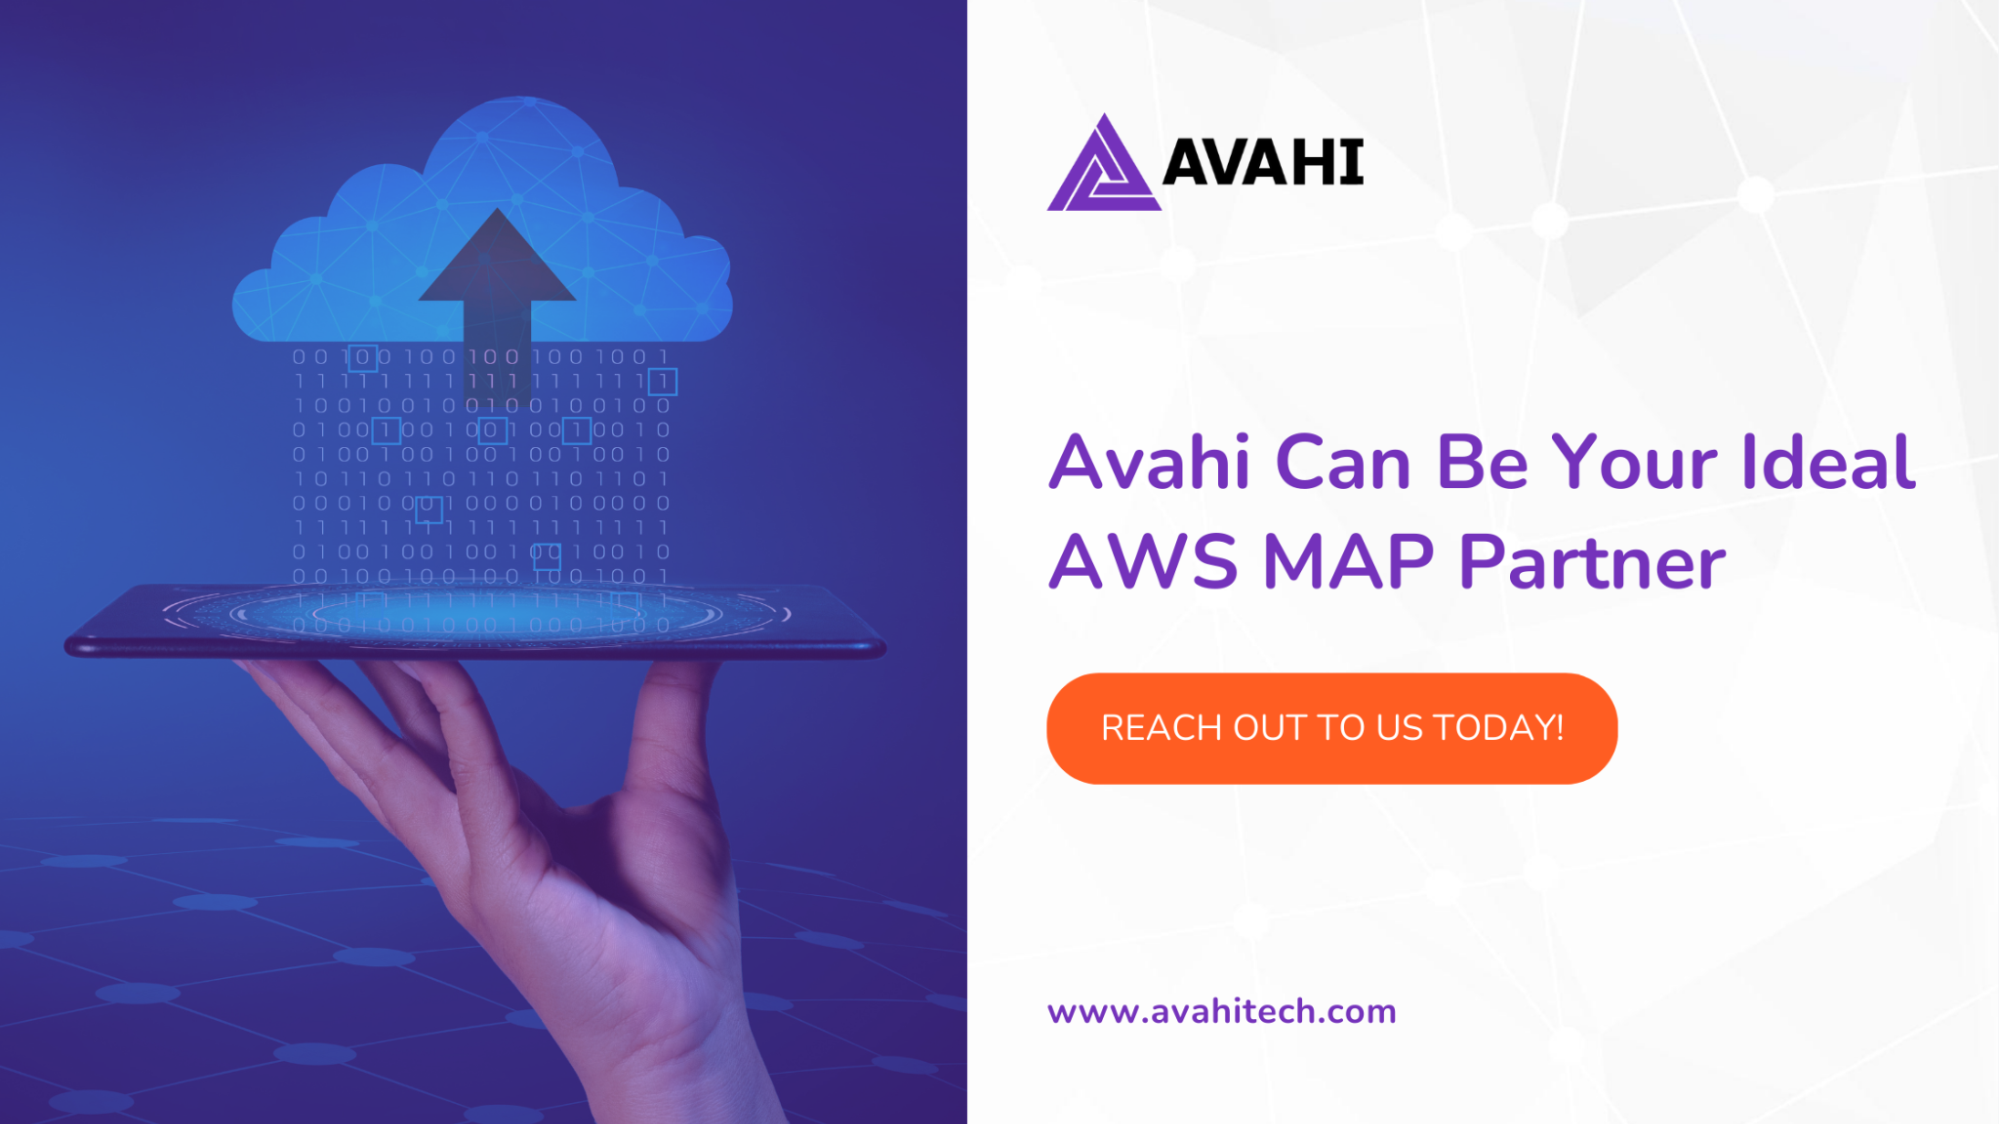 Avahi Can Be Your Ideal AWS MAP Partner